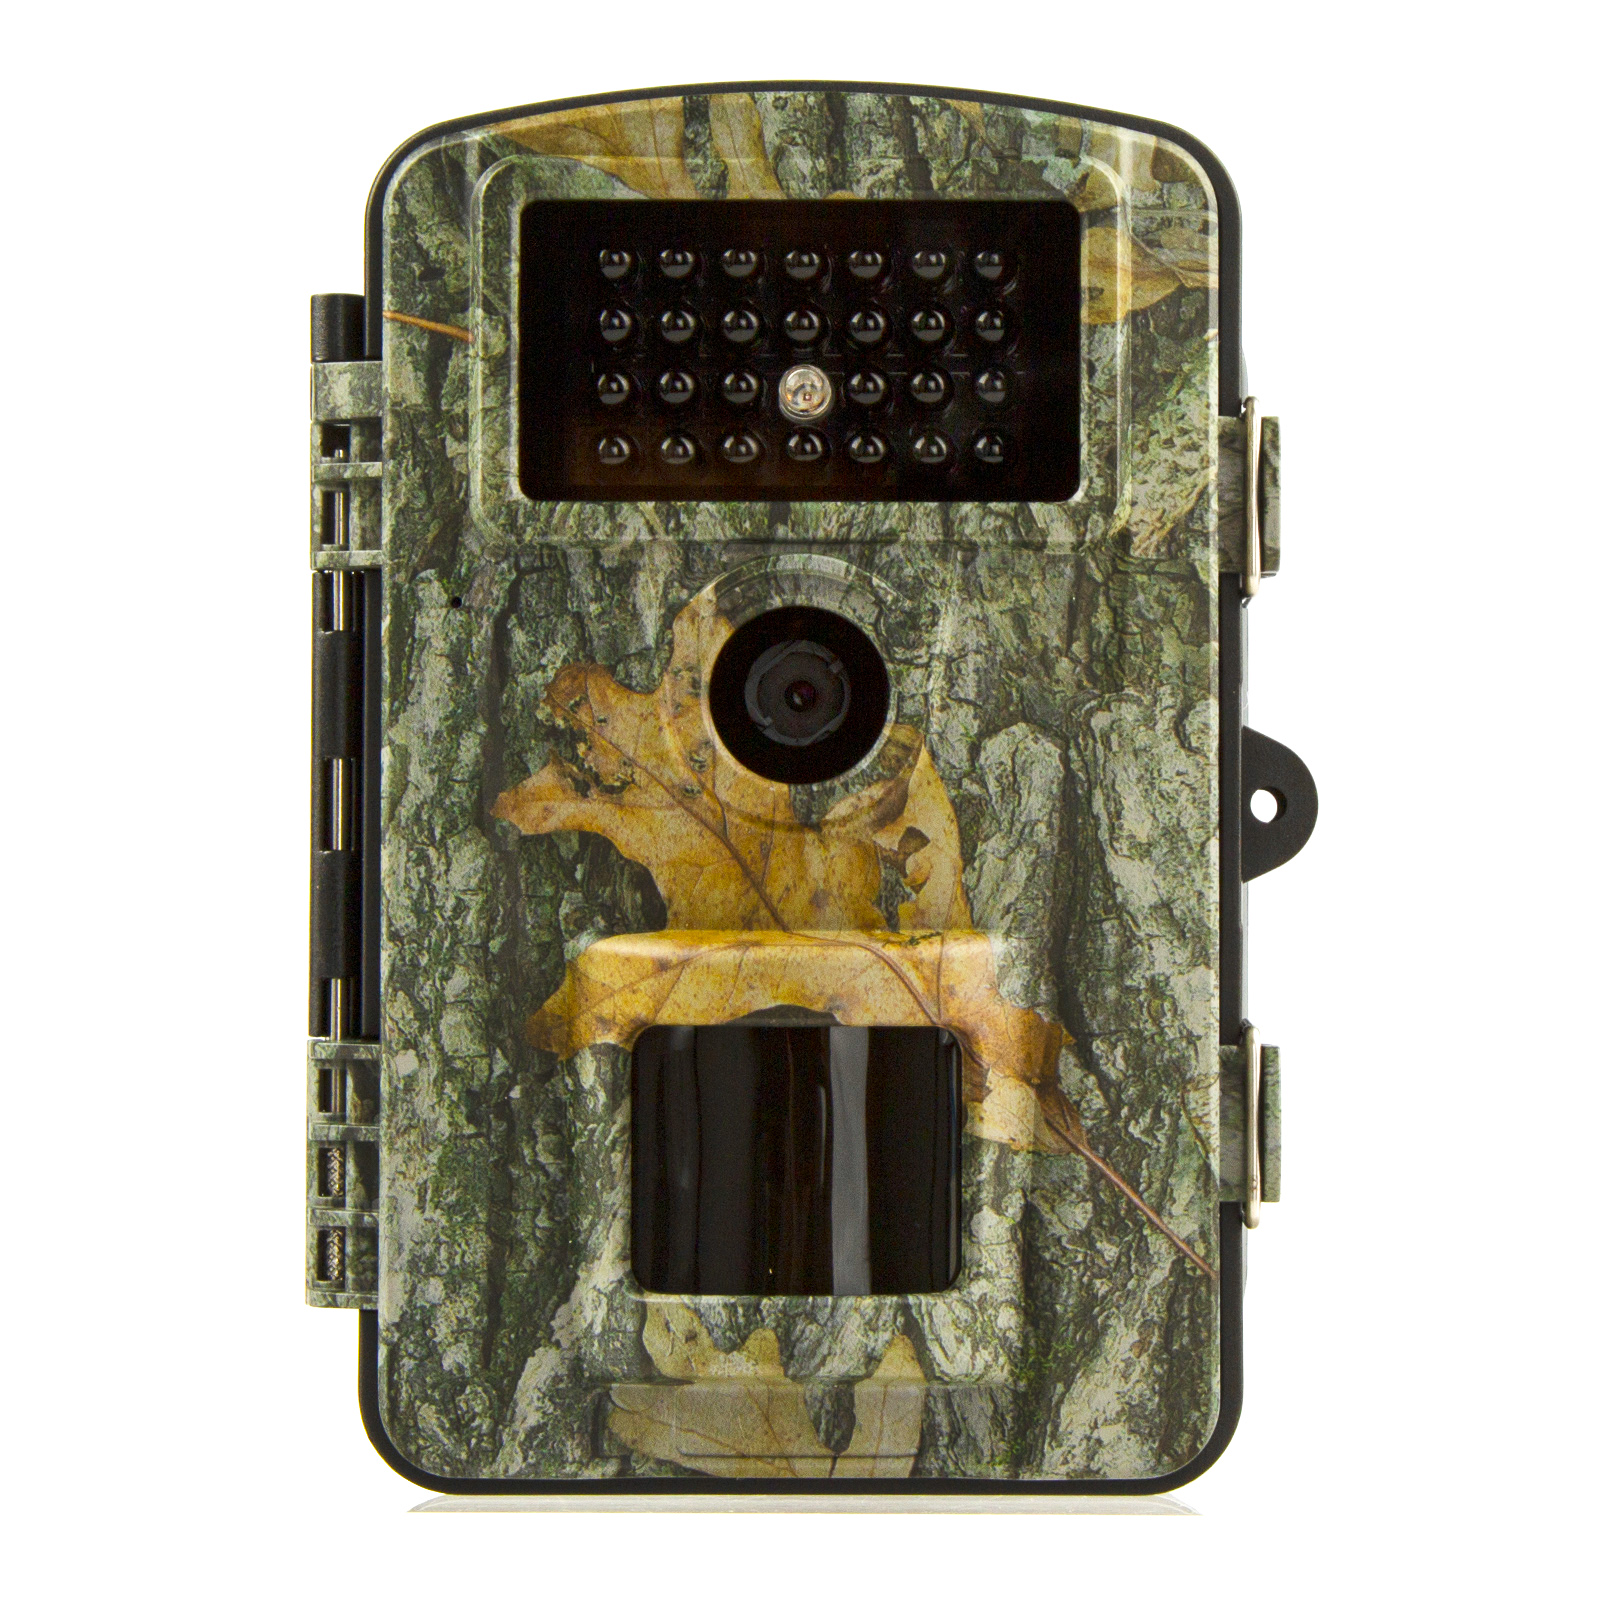 Coolife PH700A -Trail Camera 1080P 28MP Game Camera IP66 with No Glow Night Vision